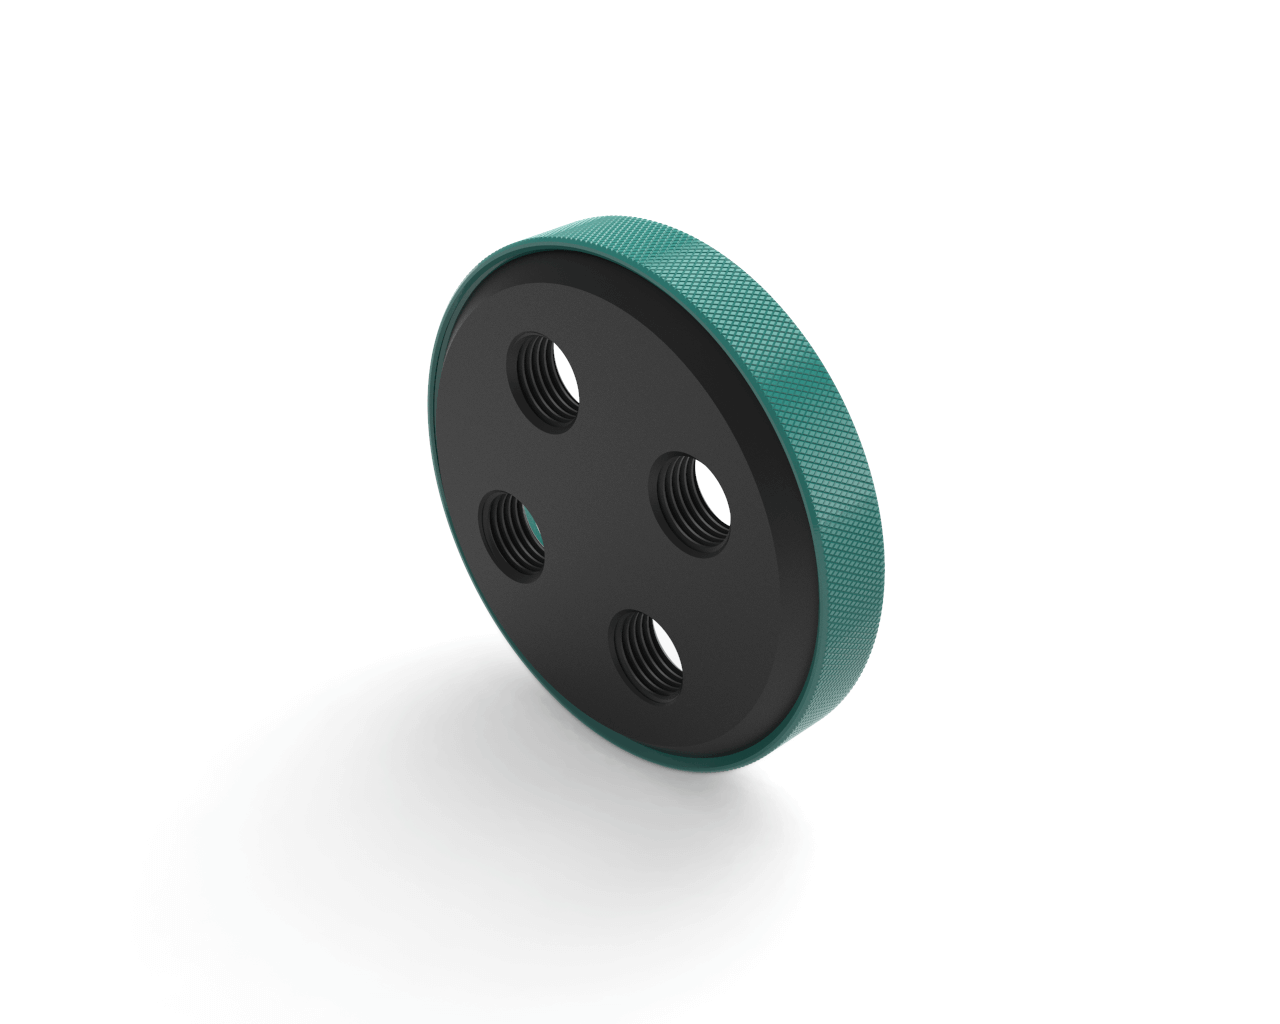 PrimoChill CTR Replacement SX Compression Ring - PrimoChill - KEEPING IT COOL Teal